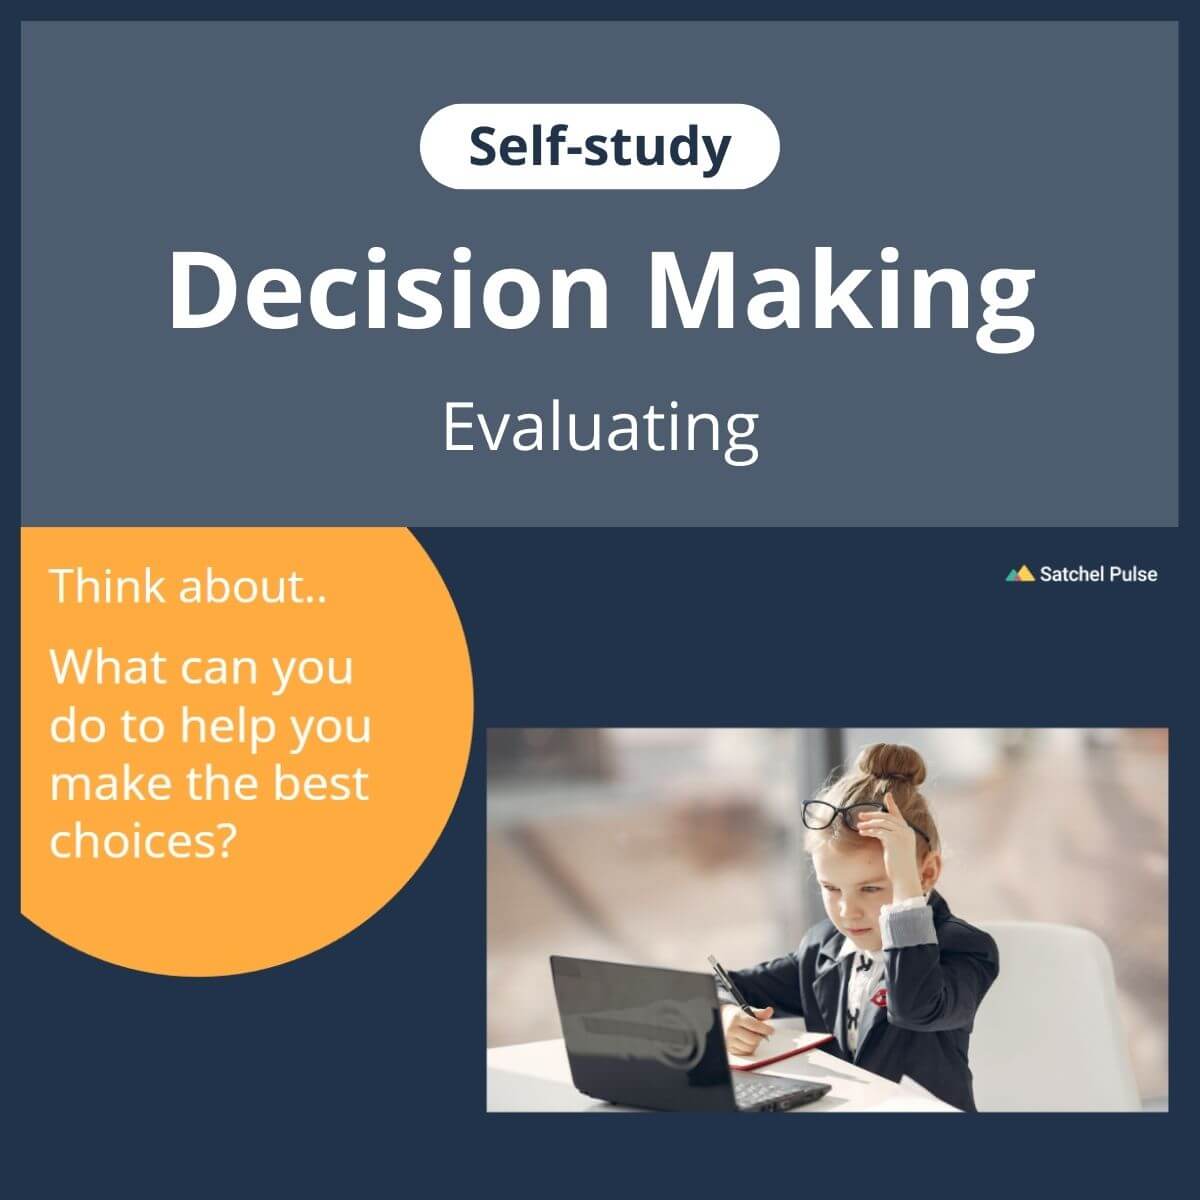 SEL self-study focusing on Evaluating to use in your classroom as one of your SEL activities for Responsible Decision-Making